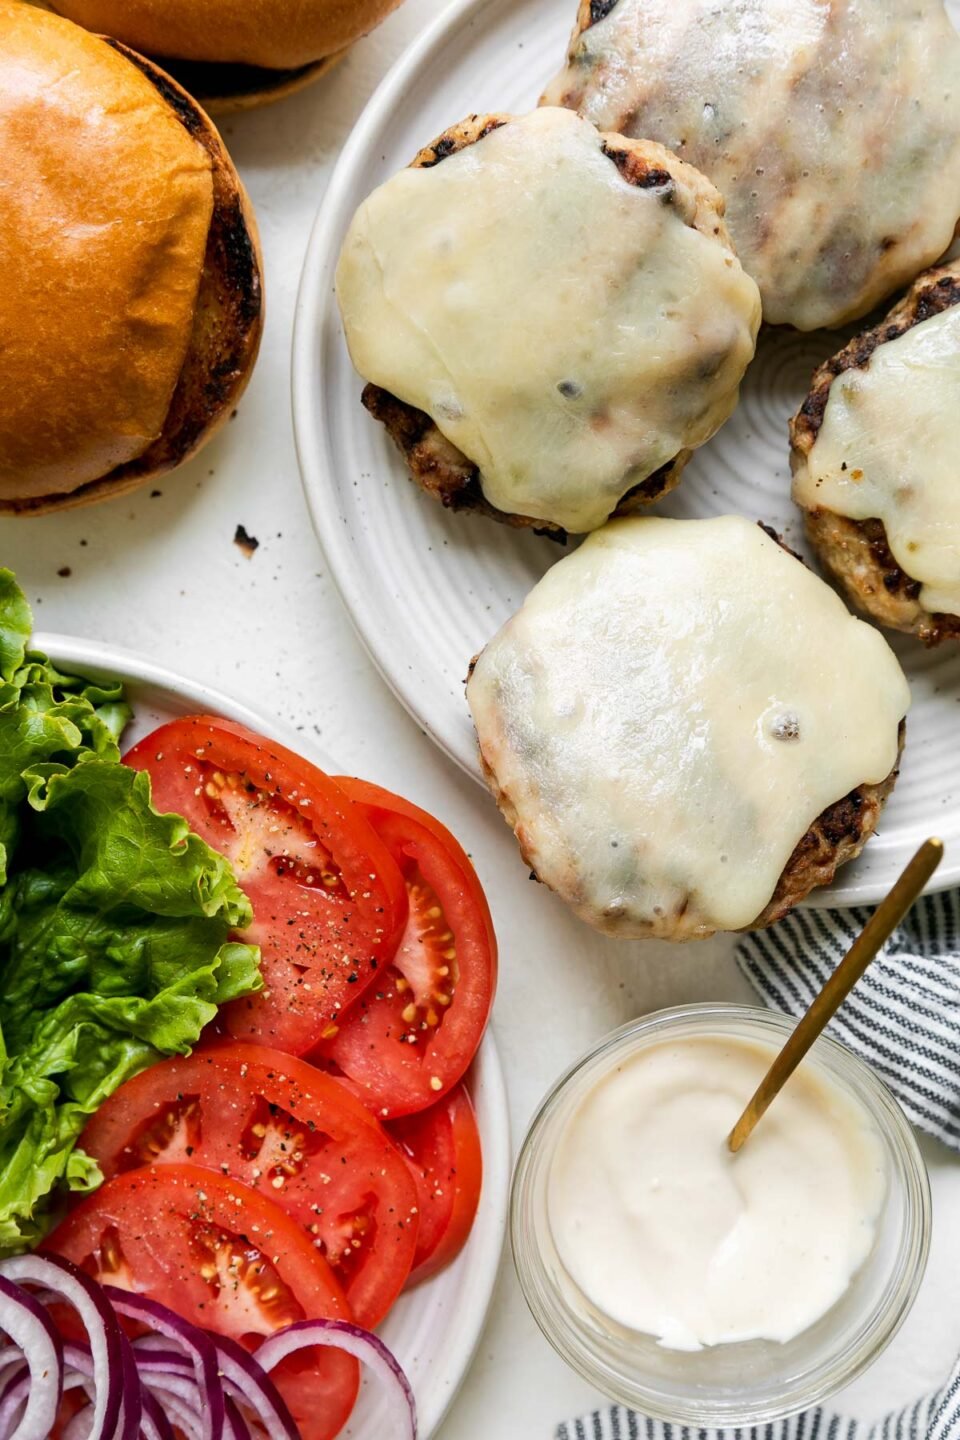 Four chicken burgers patties topped with melted cheese sit atop a white plate. Another white ceramic plate filled with lettuce, sliced tomatoes, and sliced onion sits adjacent to the plate of grilled burgers. The two plates are surrounded by toasted buns, a small clear glass jar filled with mayonnaise and a small gold spoon. A blue and white striped linen napkin rests alongside the plate.